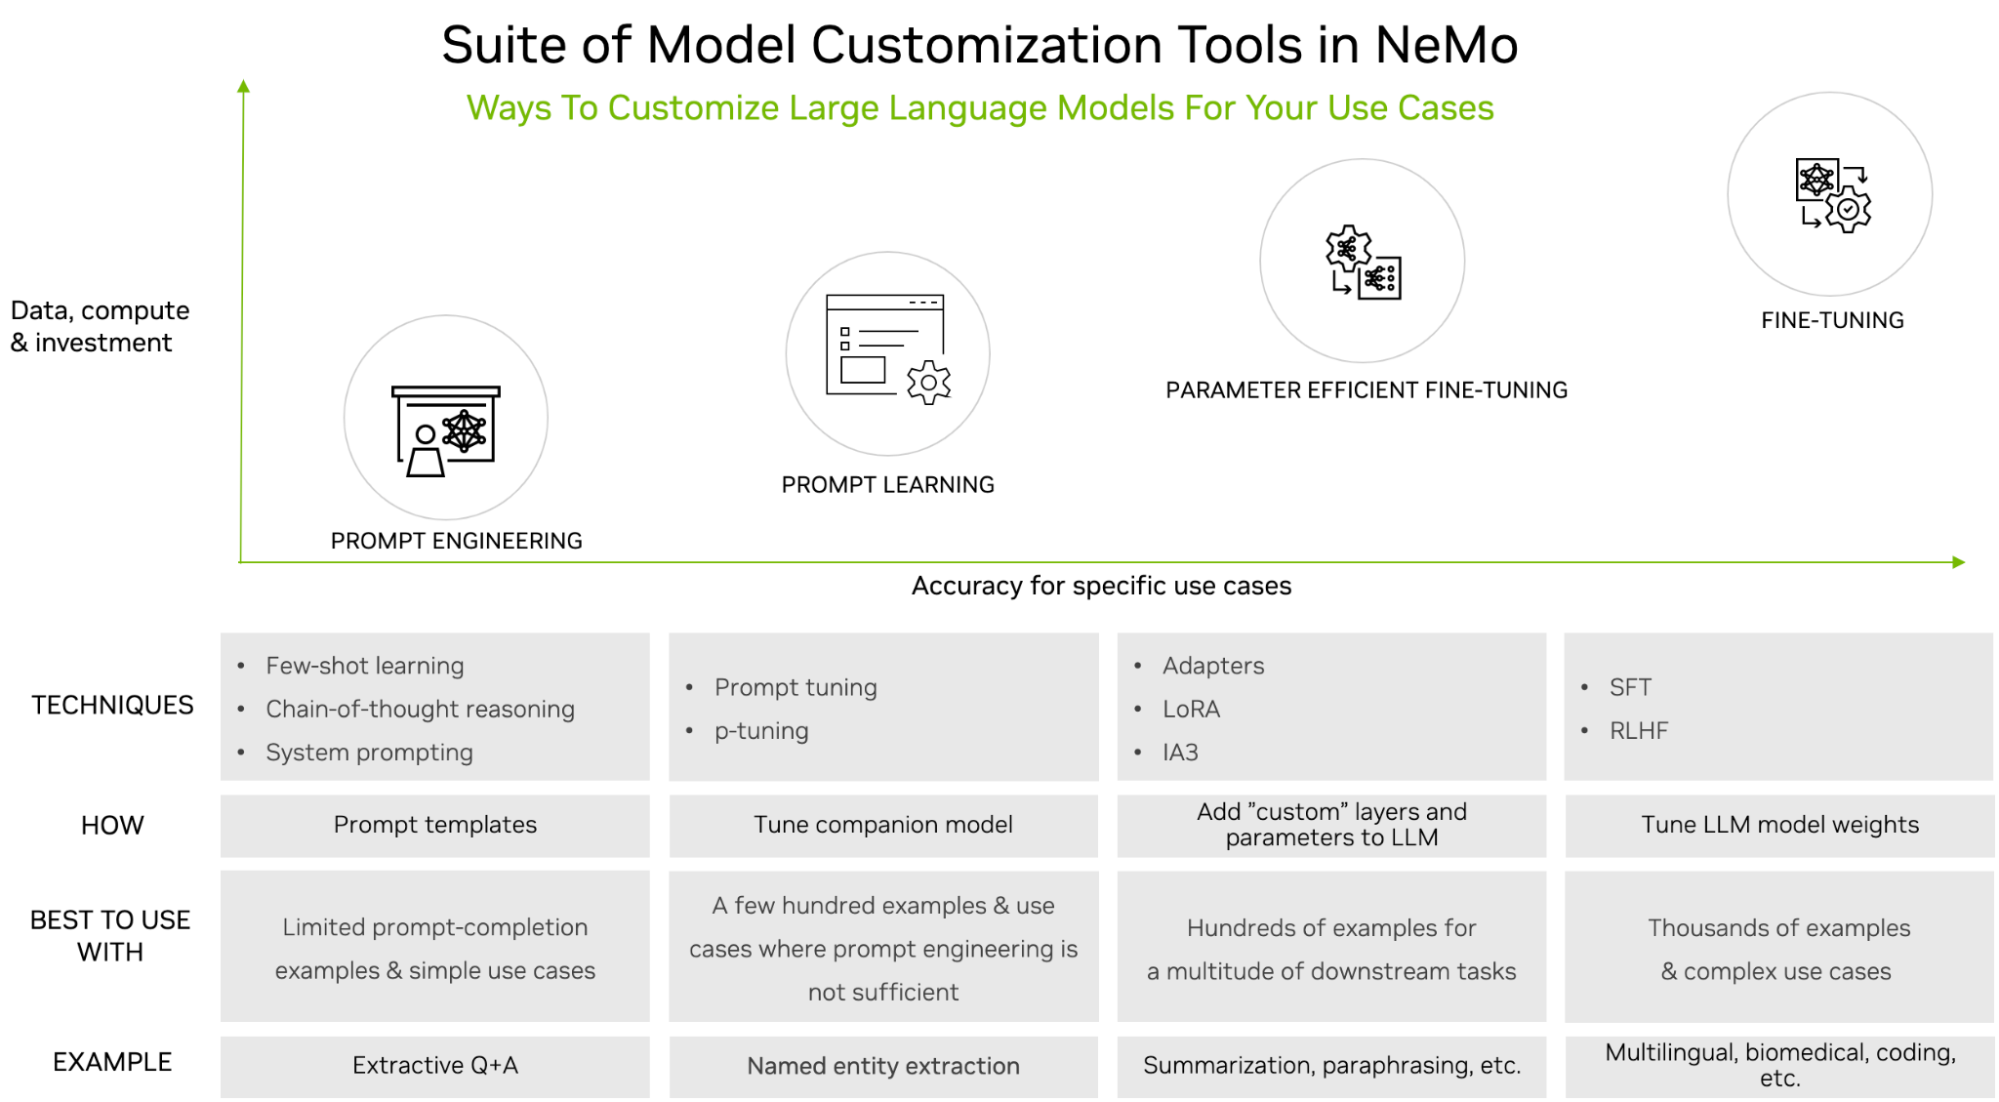 Diagram shows four customization tools with a table of techniques, use cases, and examples.